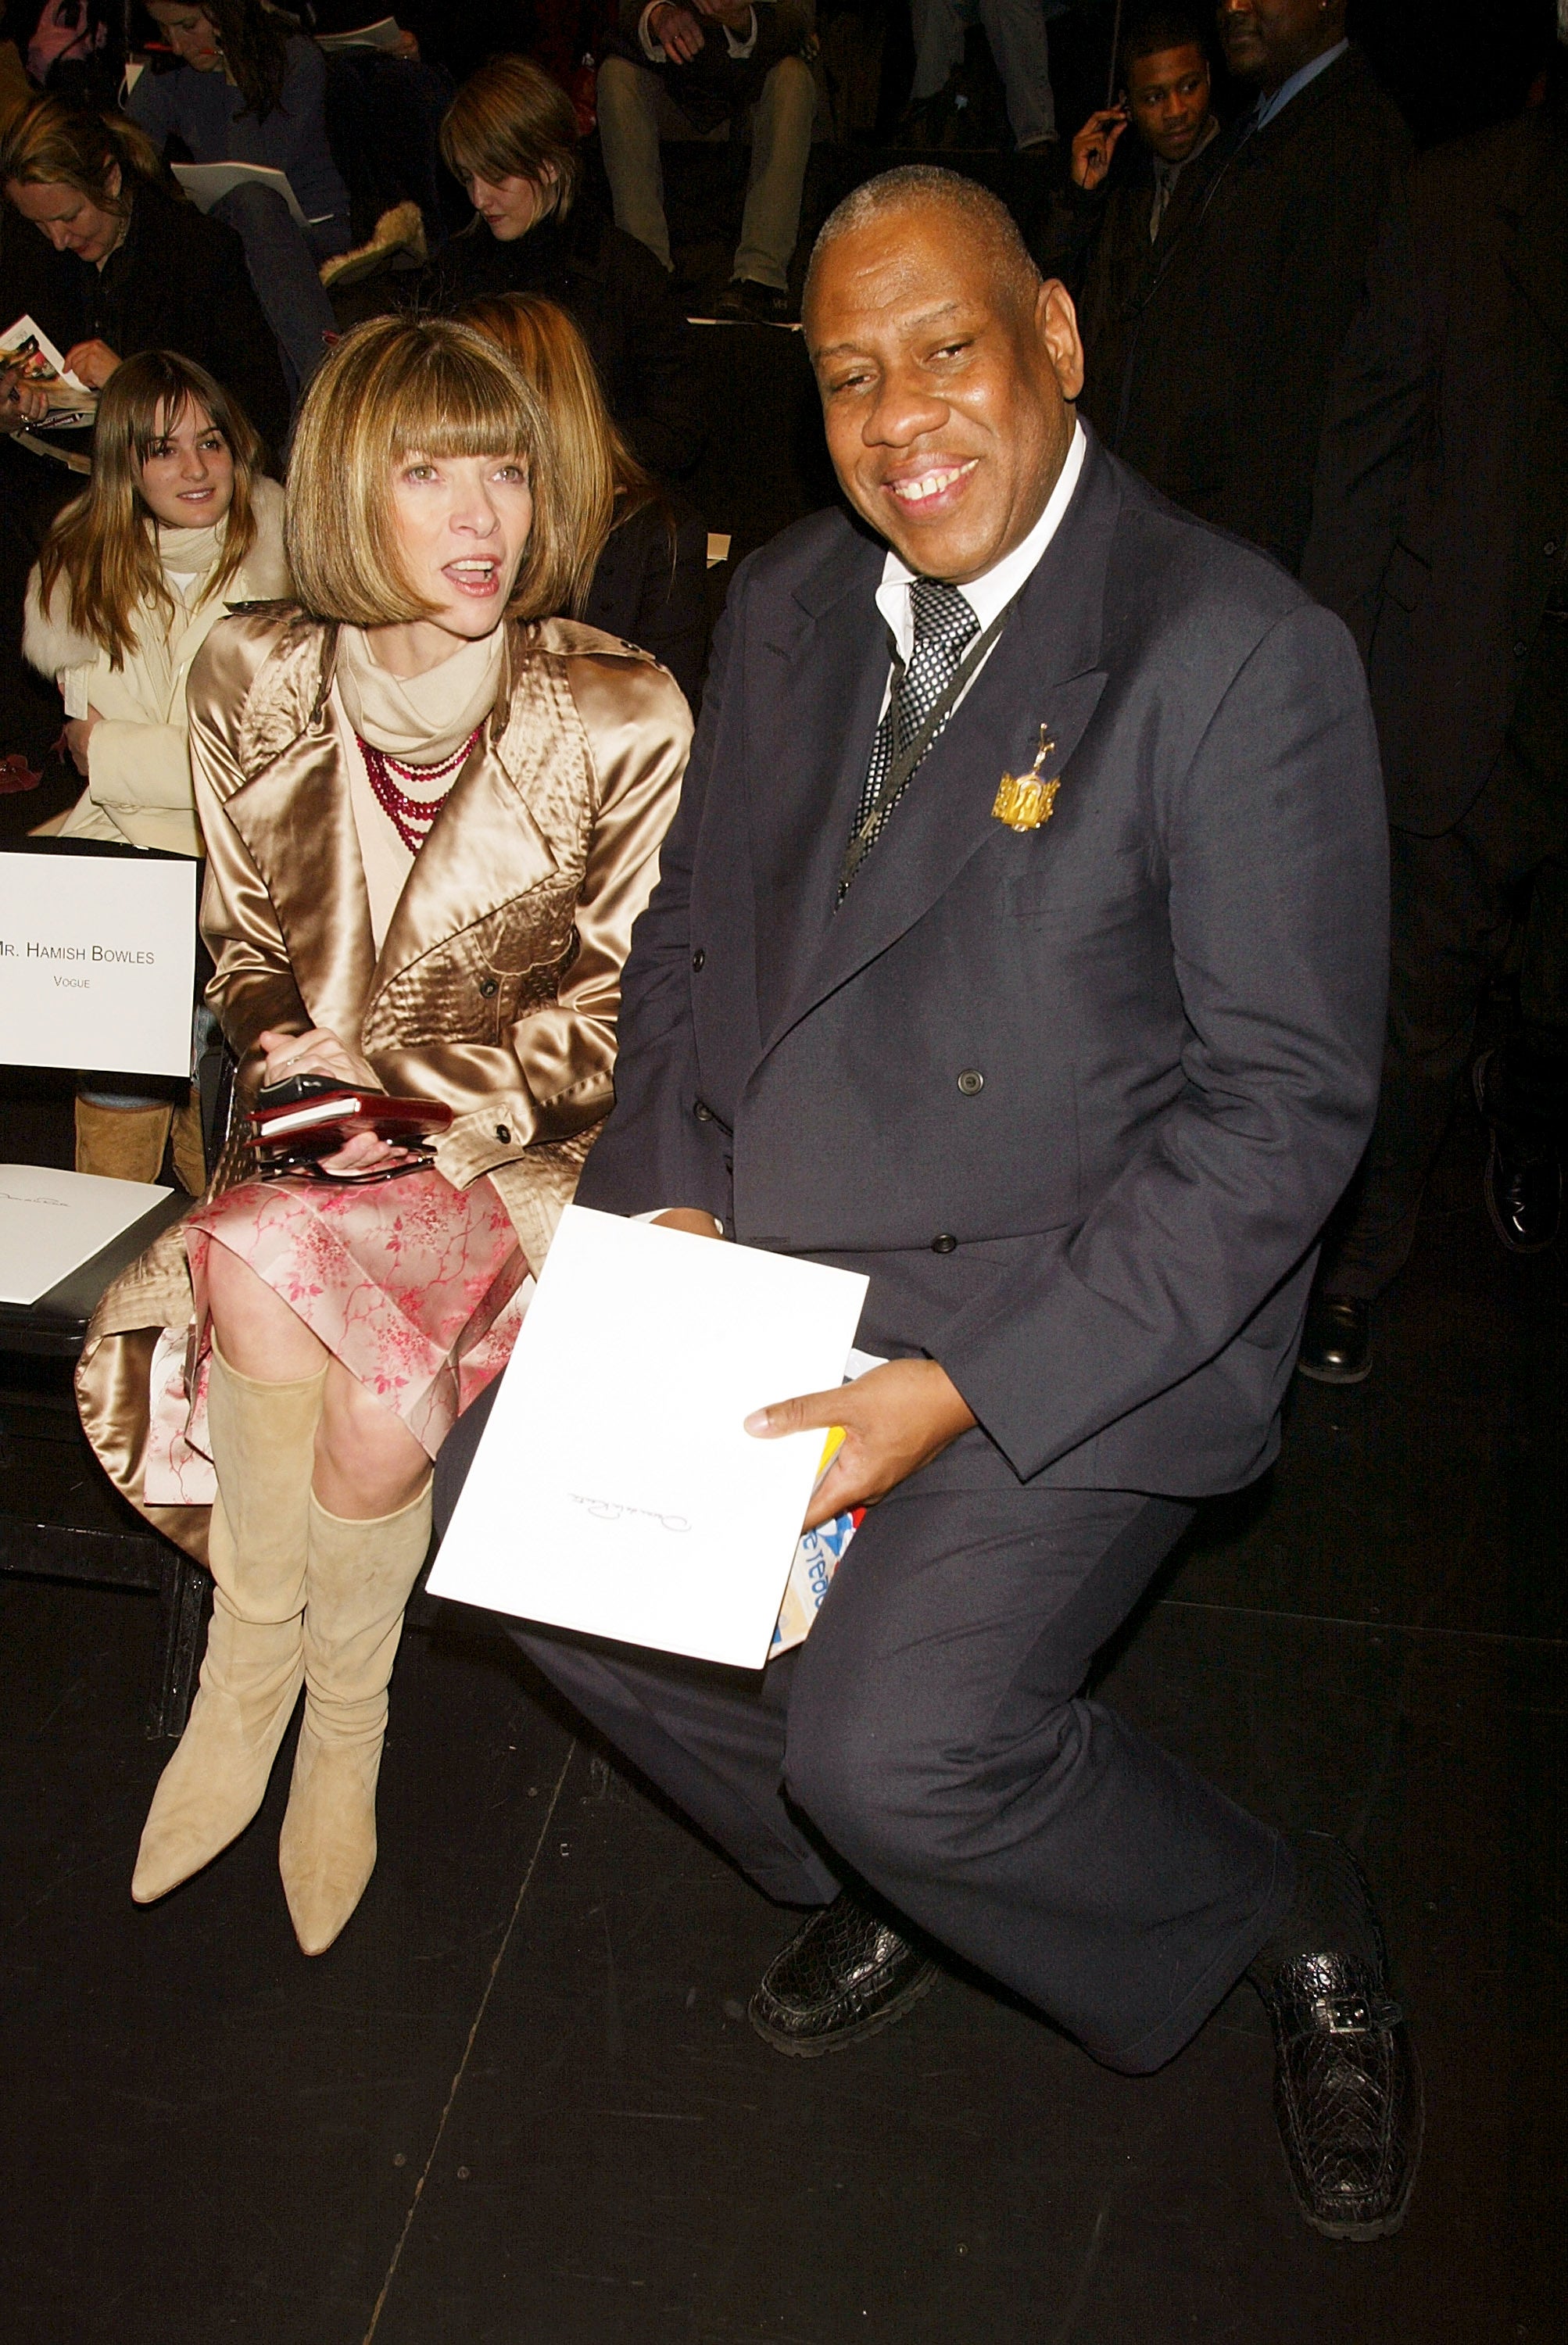 Anna Wintour and Andre Leon Talley attend the Oscar De La Renta fashion show for the Fall/Winter 2003 Collection at The Pavillion in Bryant Park during the Mercedes-Benz Fashion Week February 10, 2003